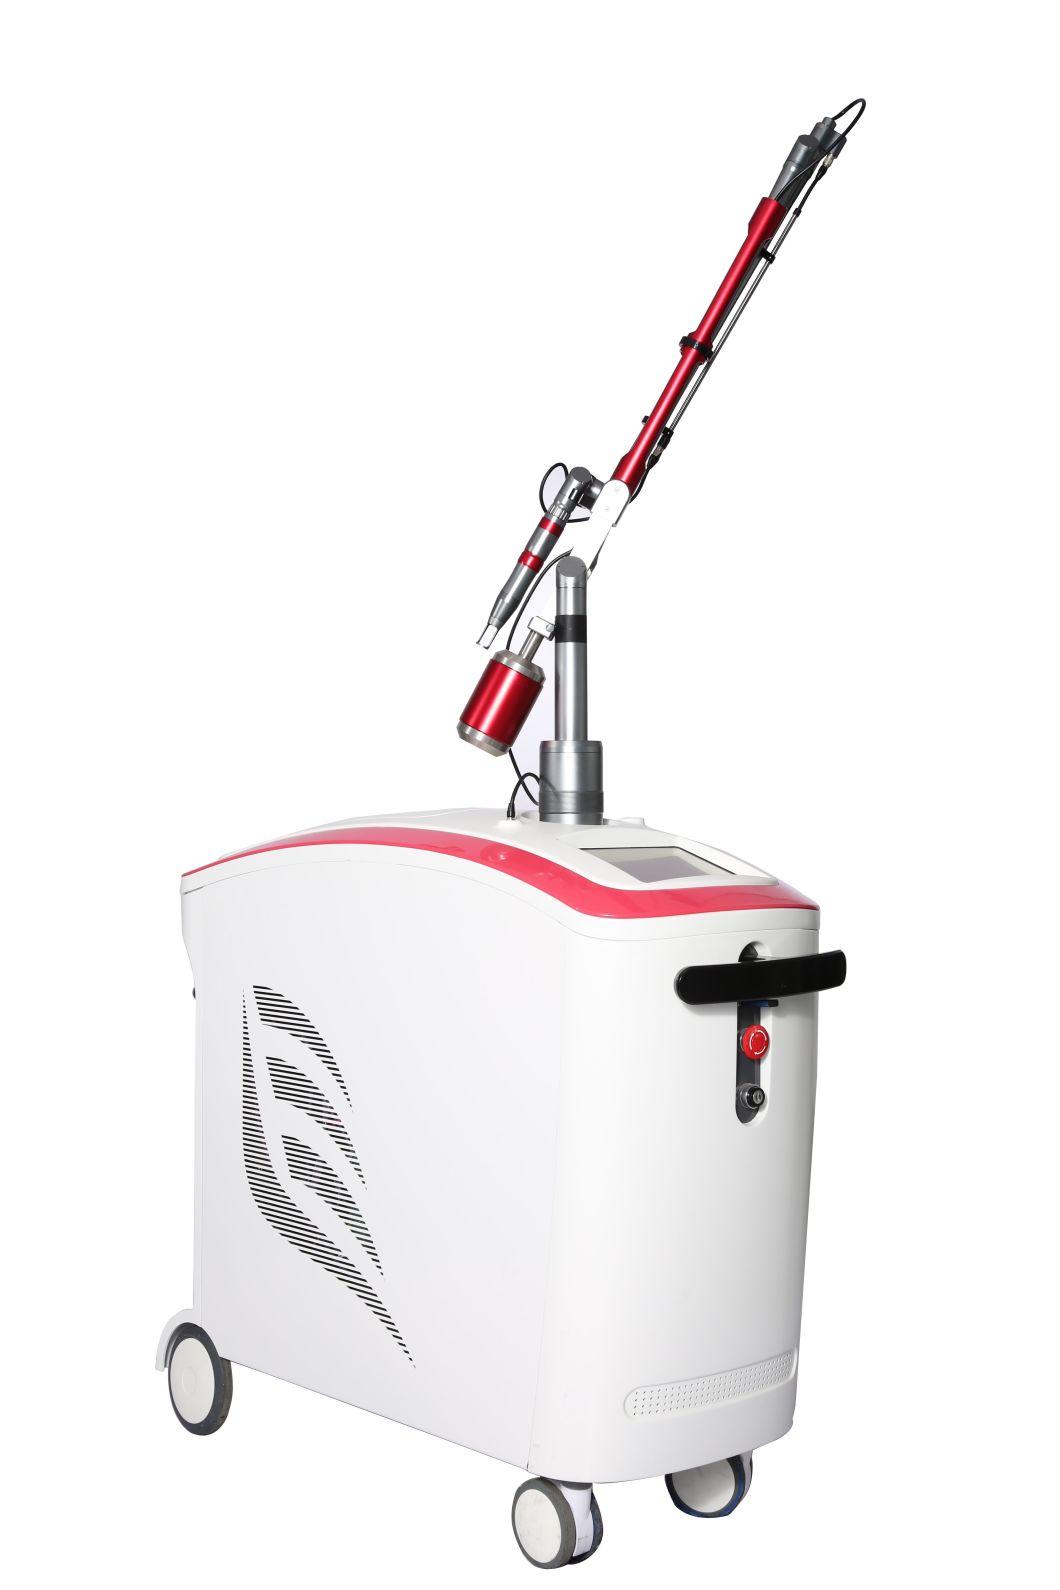 Picosecond Laser Tattoo Removal Freckle Removal Beauty Salon Equipment